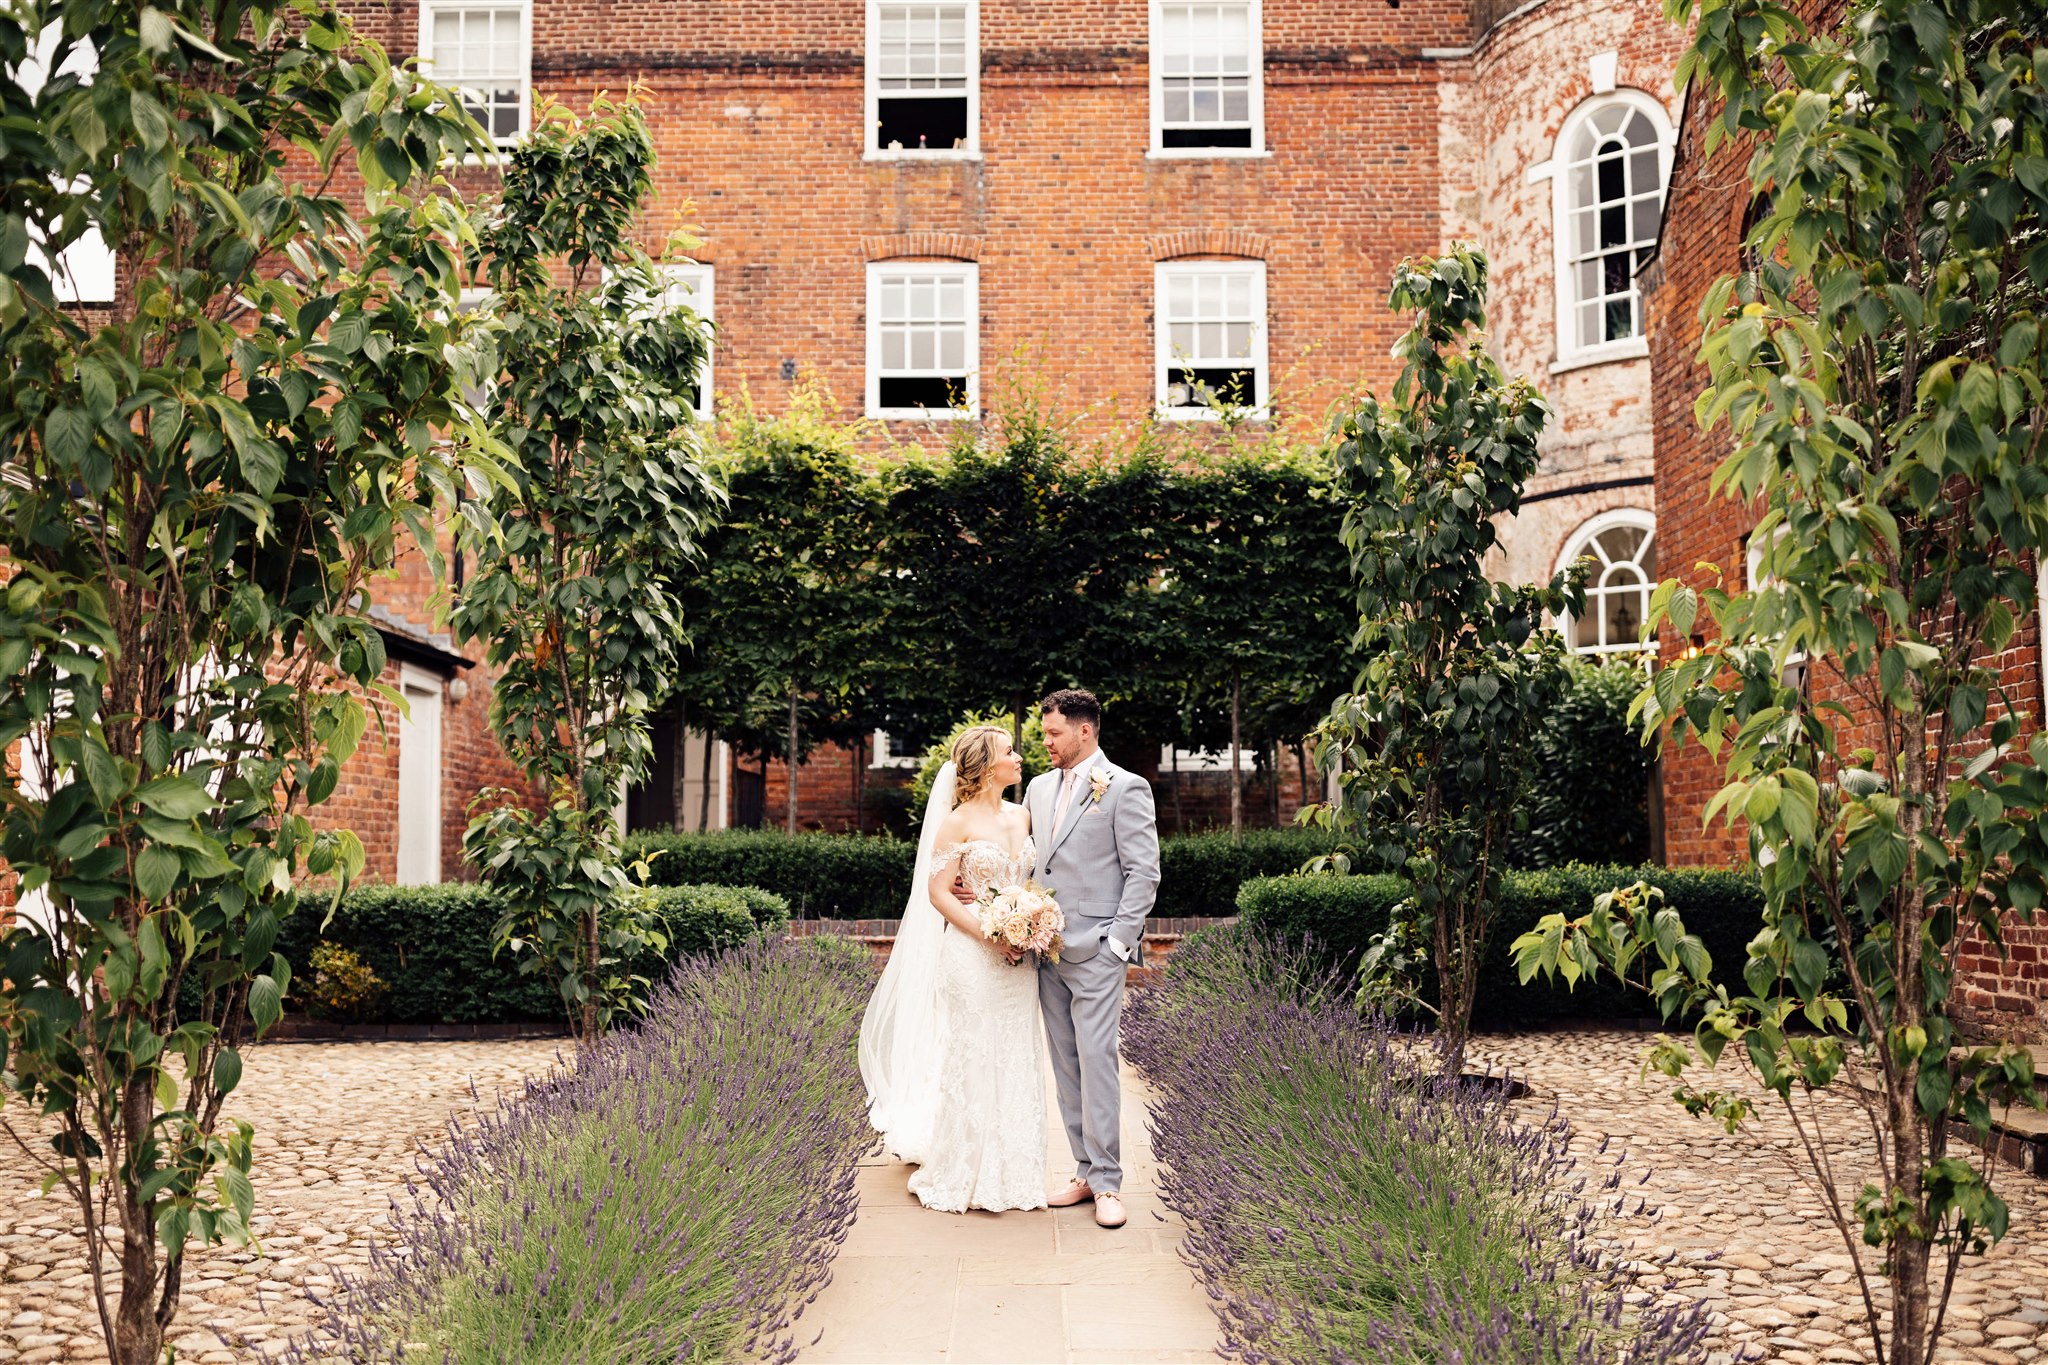 A bride wearing an off the shoulder white lace dress stands next to a groom wearing a grey suit and pink tie with the background of a red brick Georgian mansion with an alley of lavender in the foreground